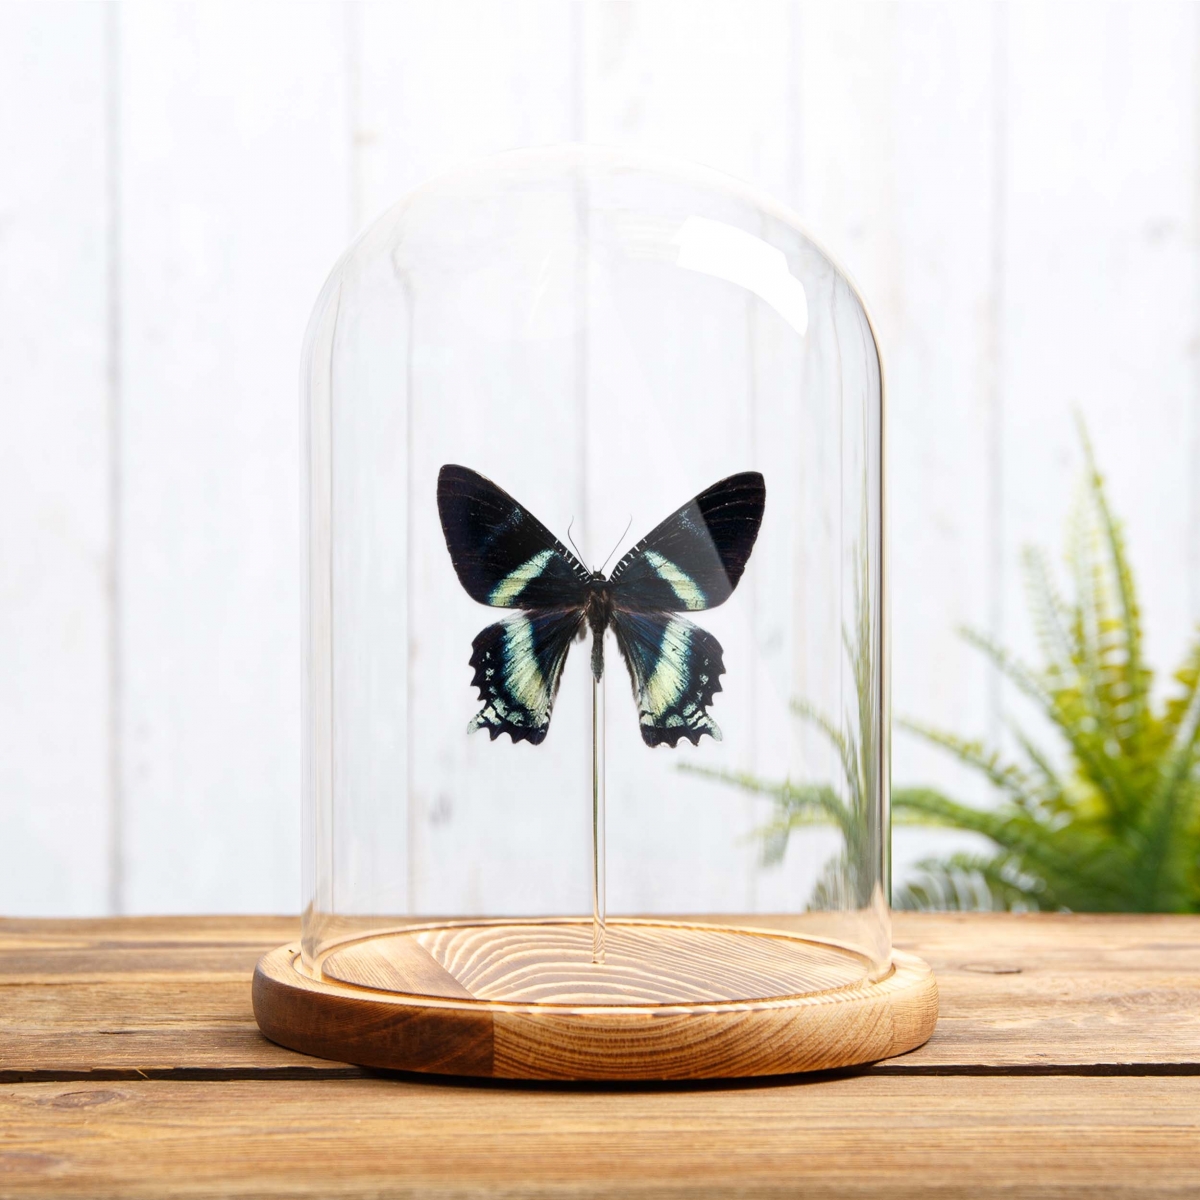 Alcides orontes Moth in Glass Dome with Wooden Base from Maluku islands